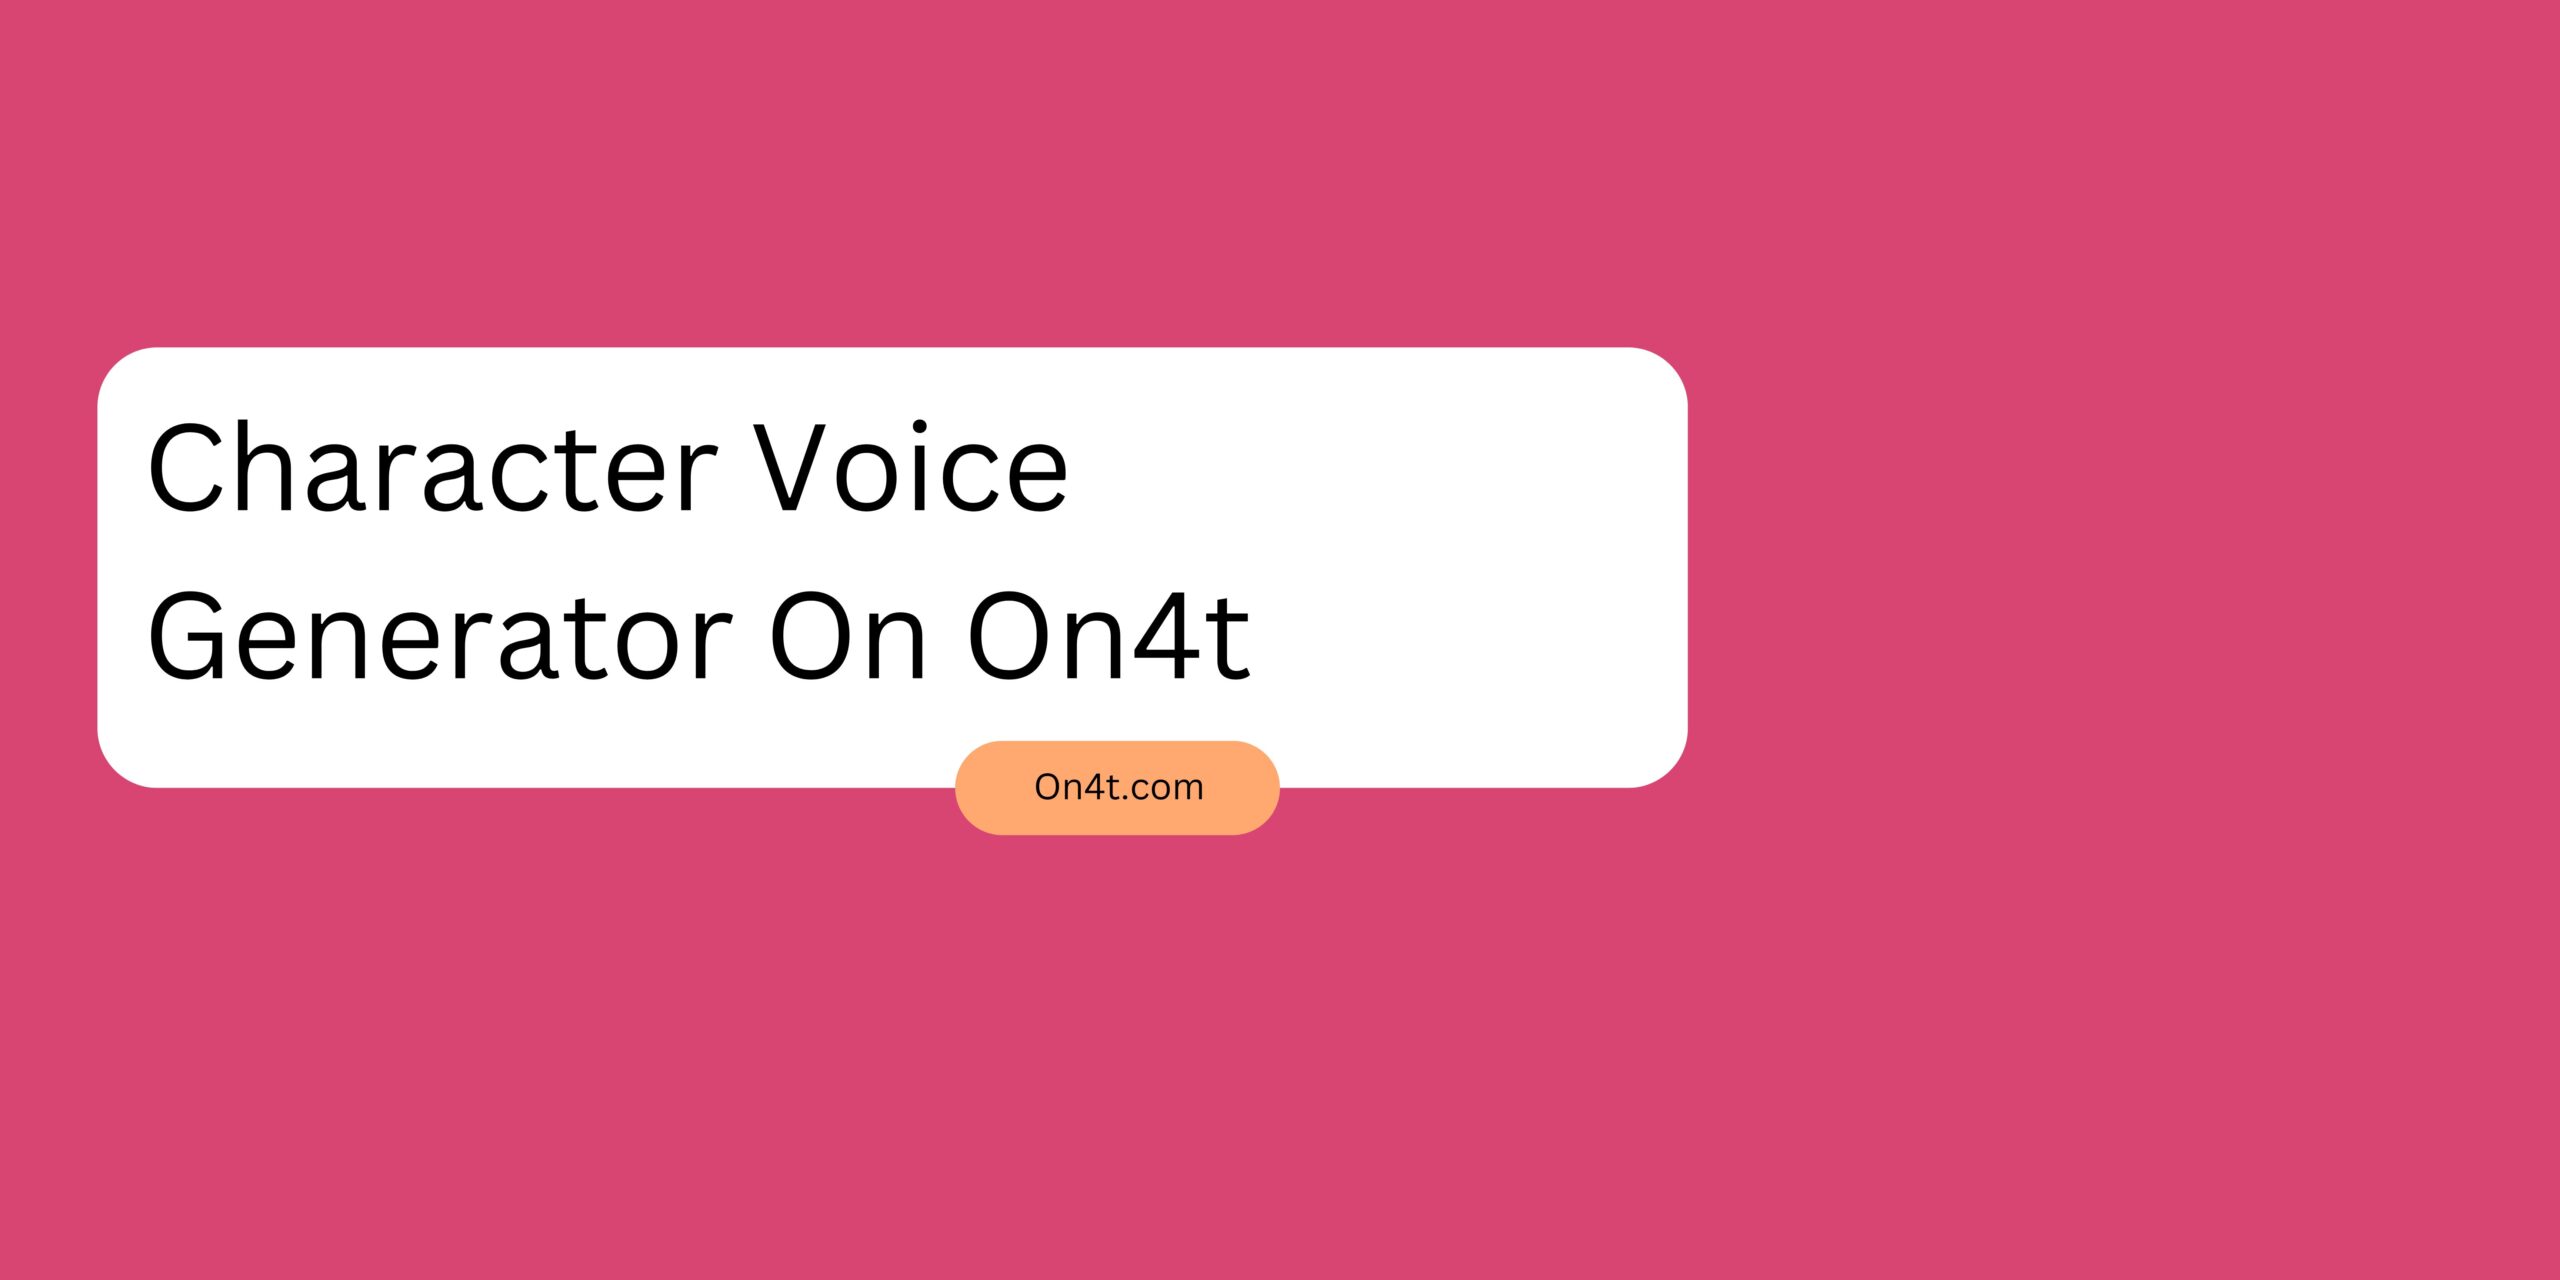 Character Voice Generator On On4t